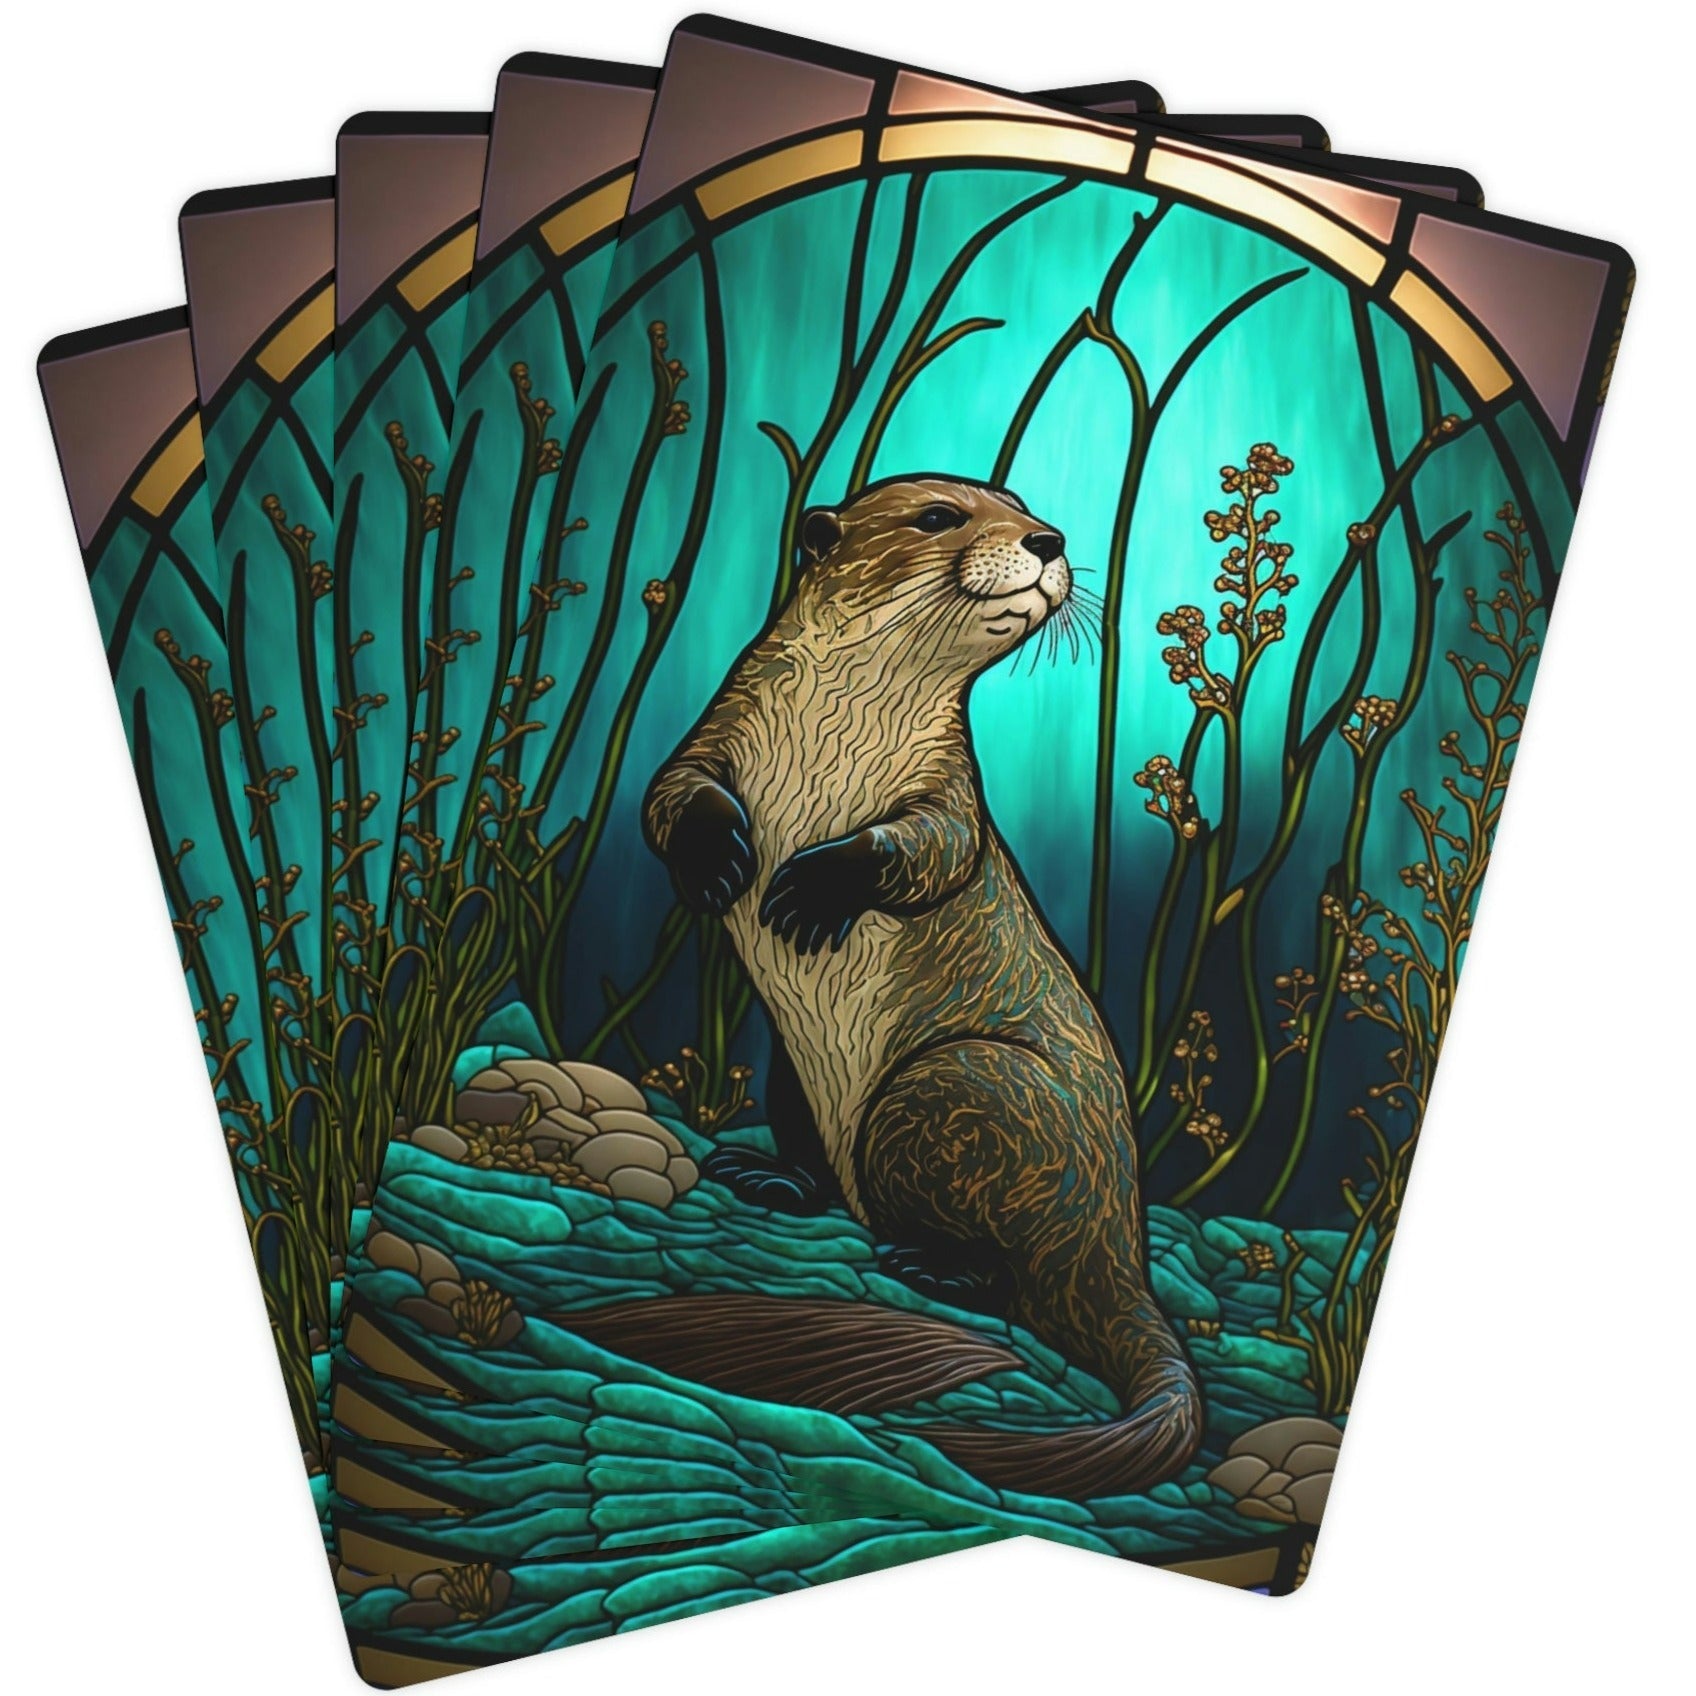 Stained Glass Otter Lake Poker Playing Cards